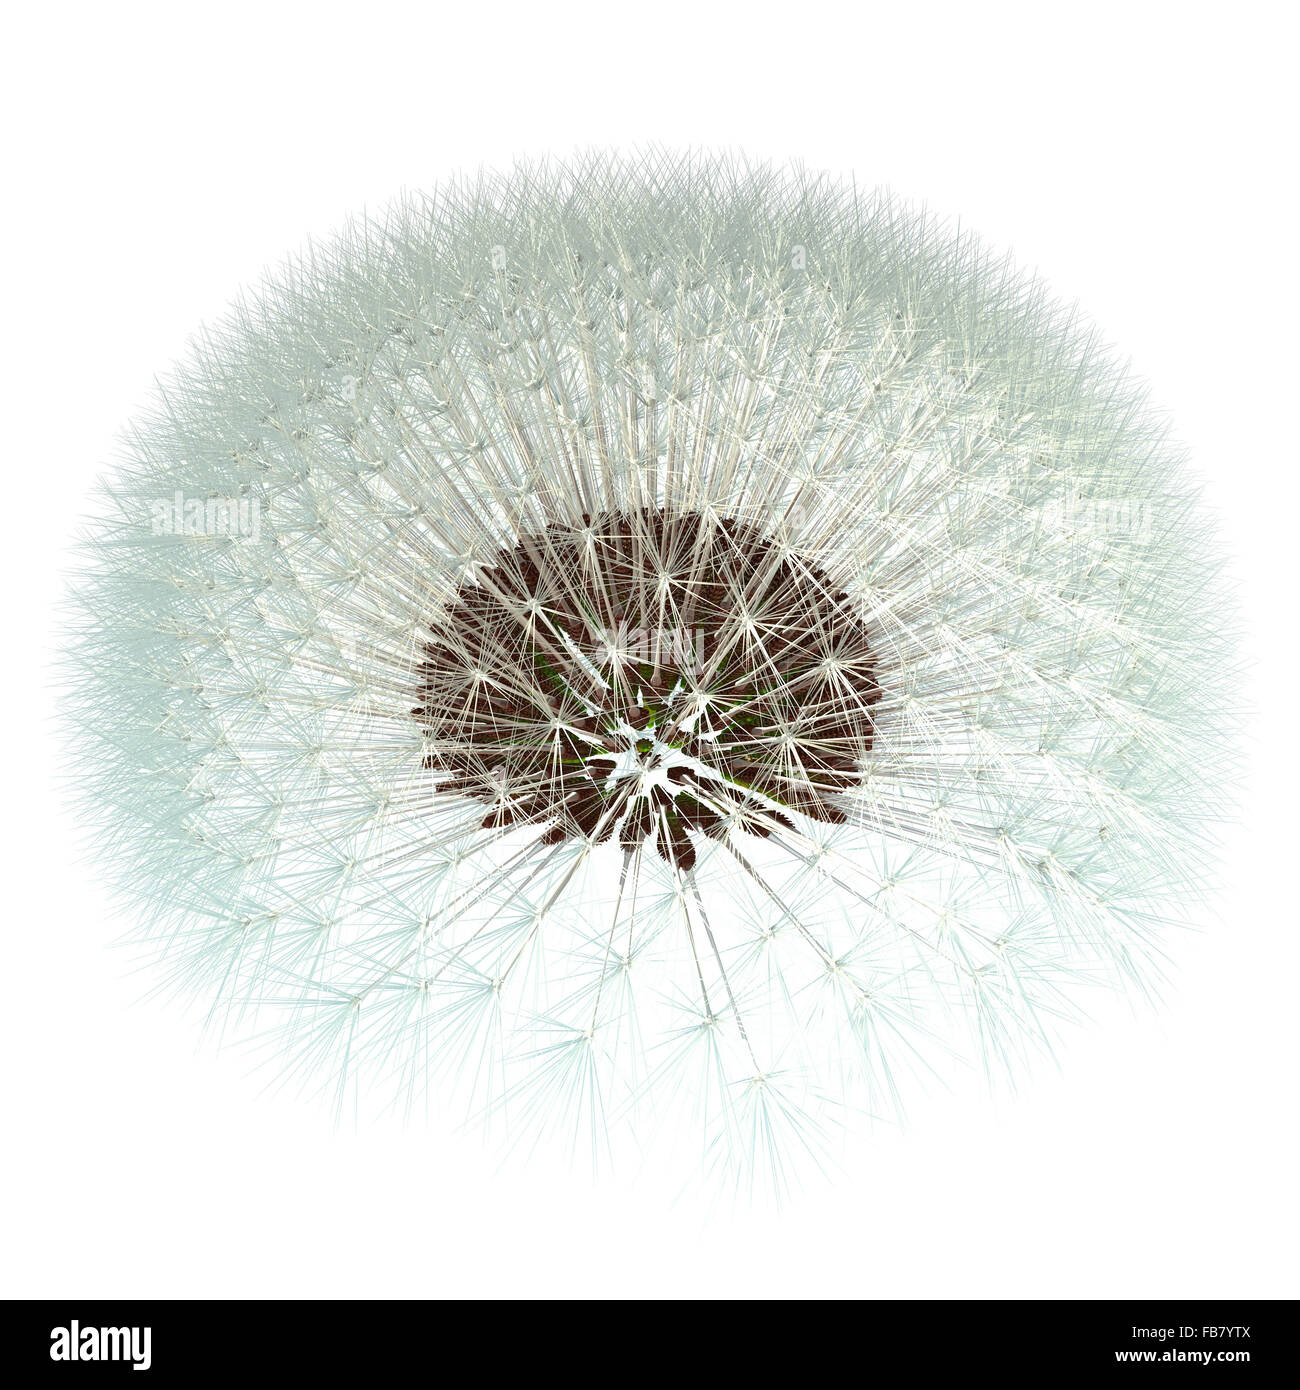 Dandelion seeds ready to take to the wind! 3d render based on experimentation with the golden ratio fibonacci sequence. Isn't na. Stock Photo